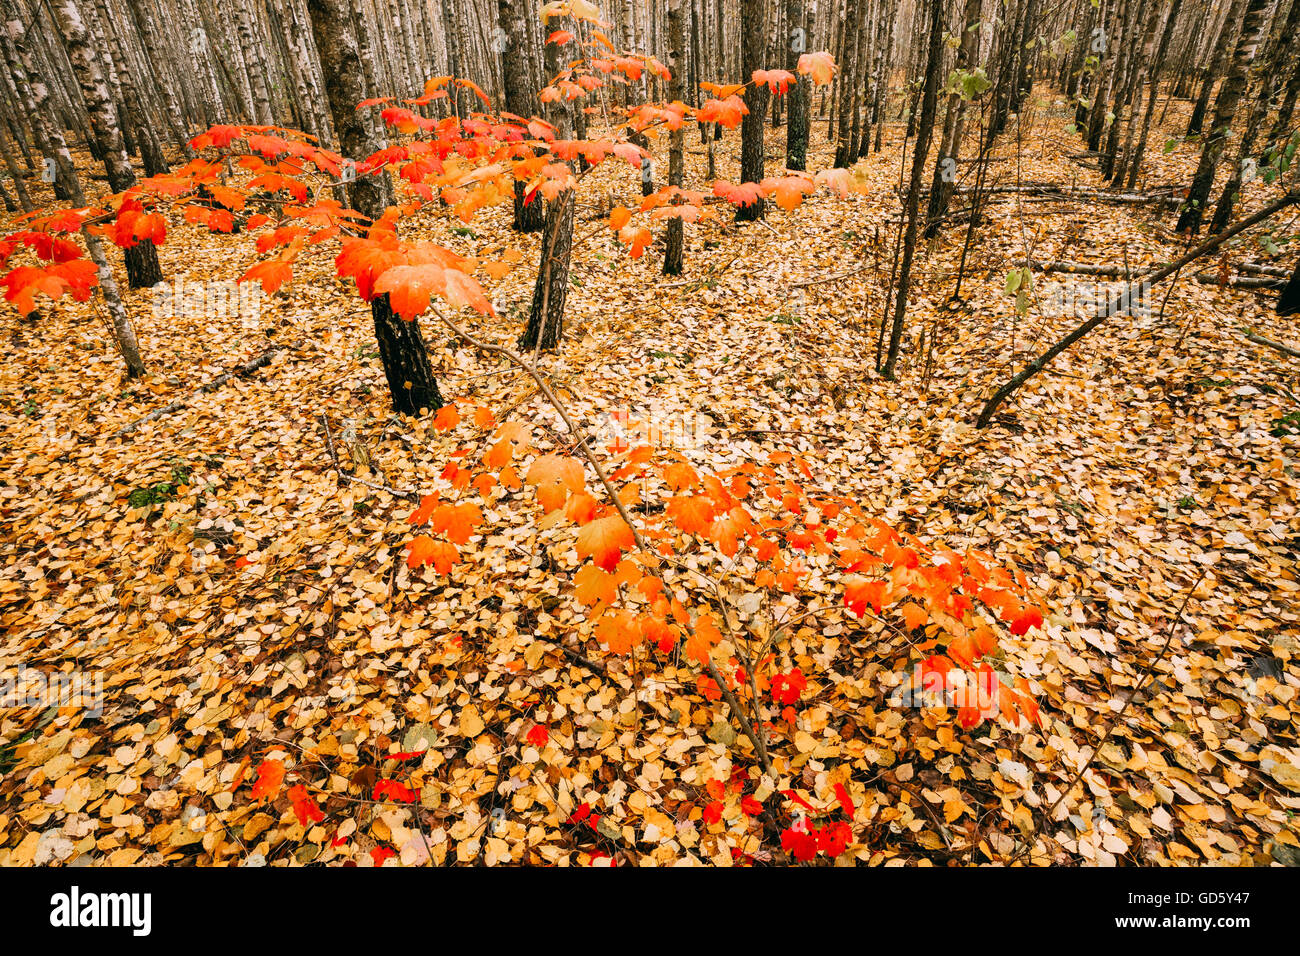 Young Maple Tree Grows In The Birch Grove. Maple With Red Leaves On A Background Of The Ground Strewn With Yellow Leaves In Autu Stock Photo